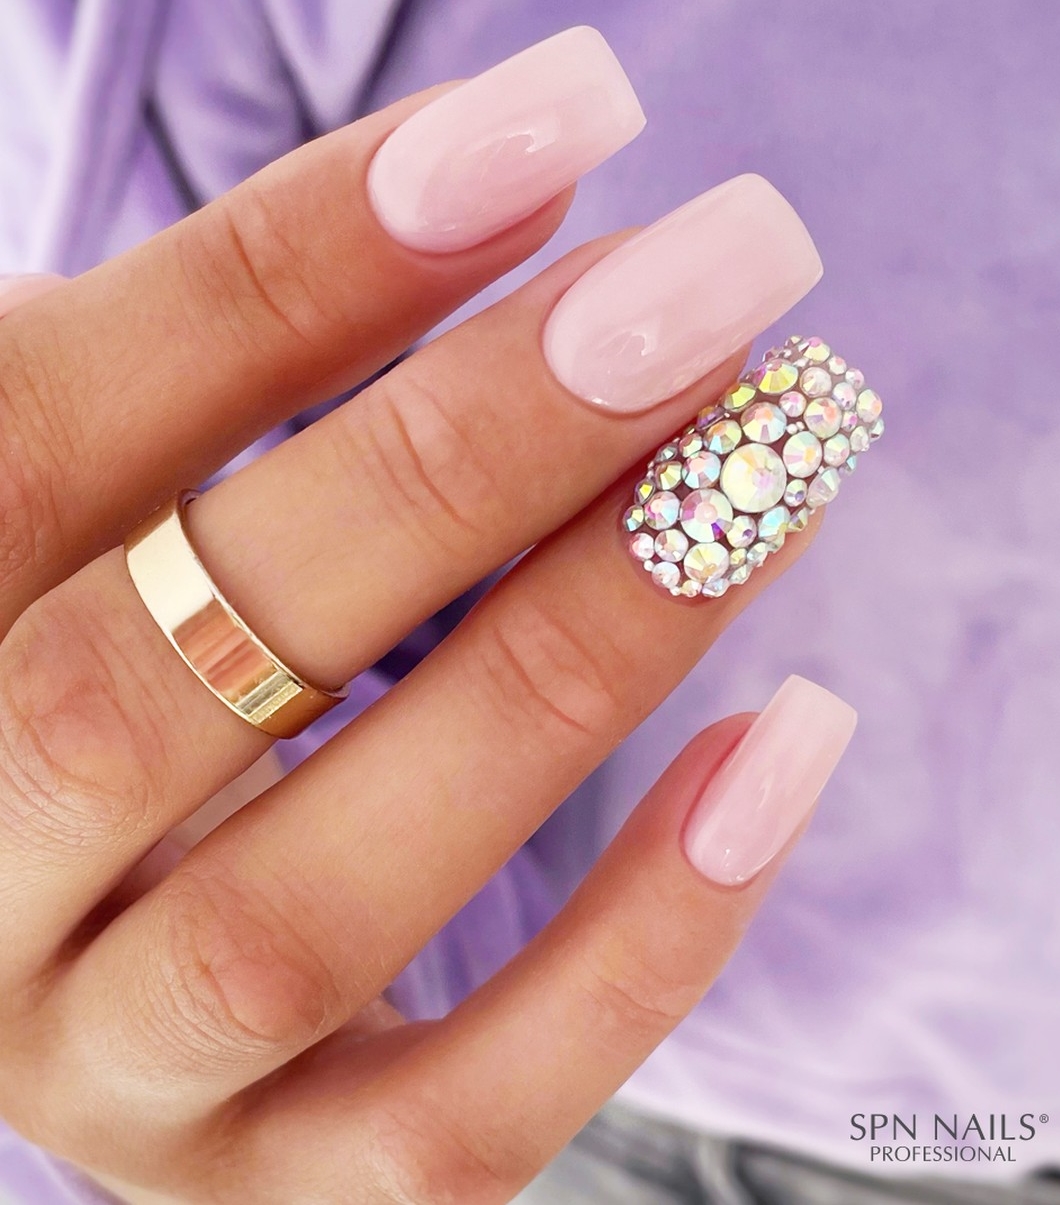 Nude Wedding Nails with Rhinestones on Accent Nail